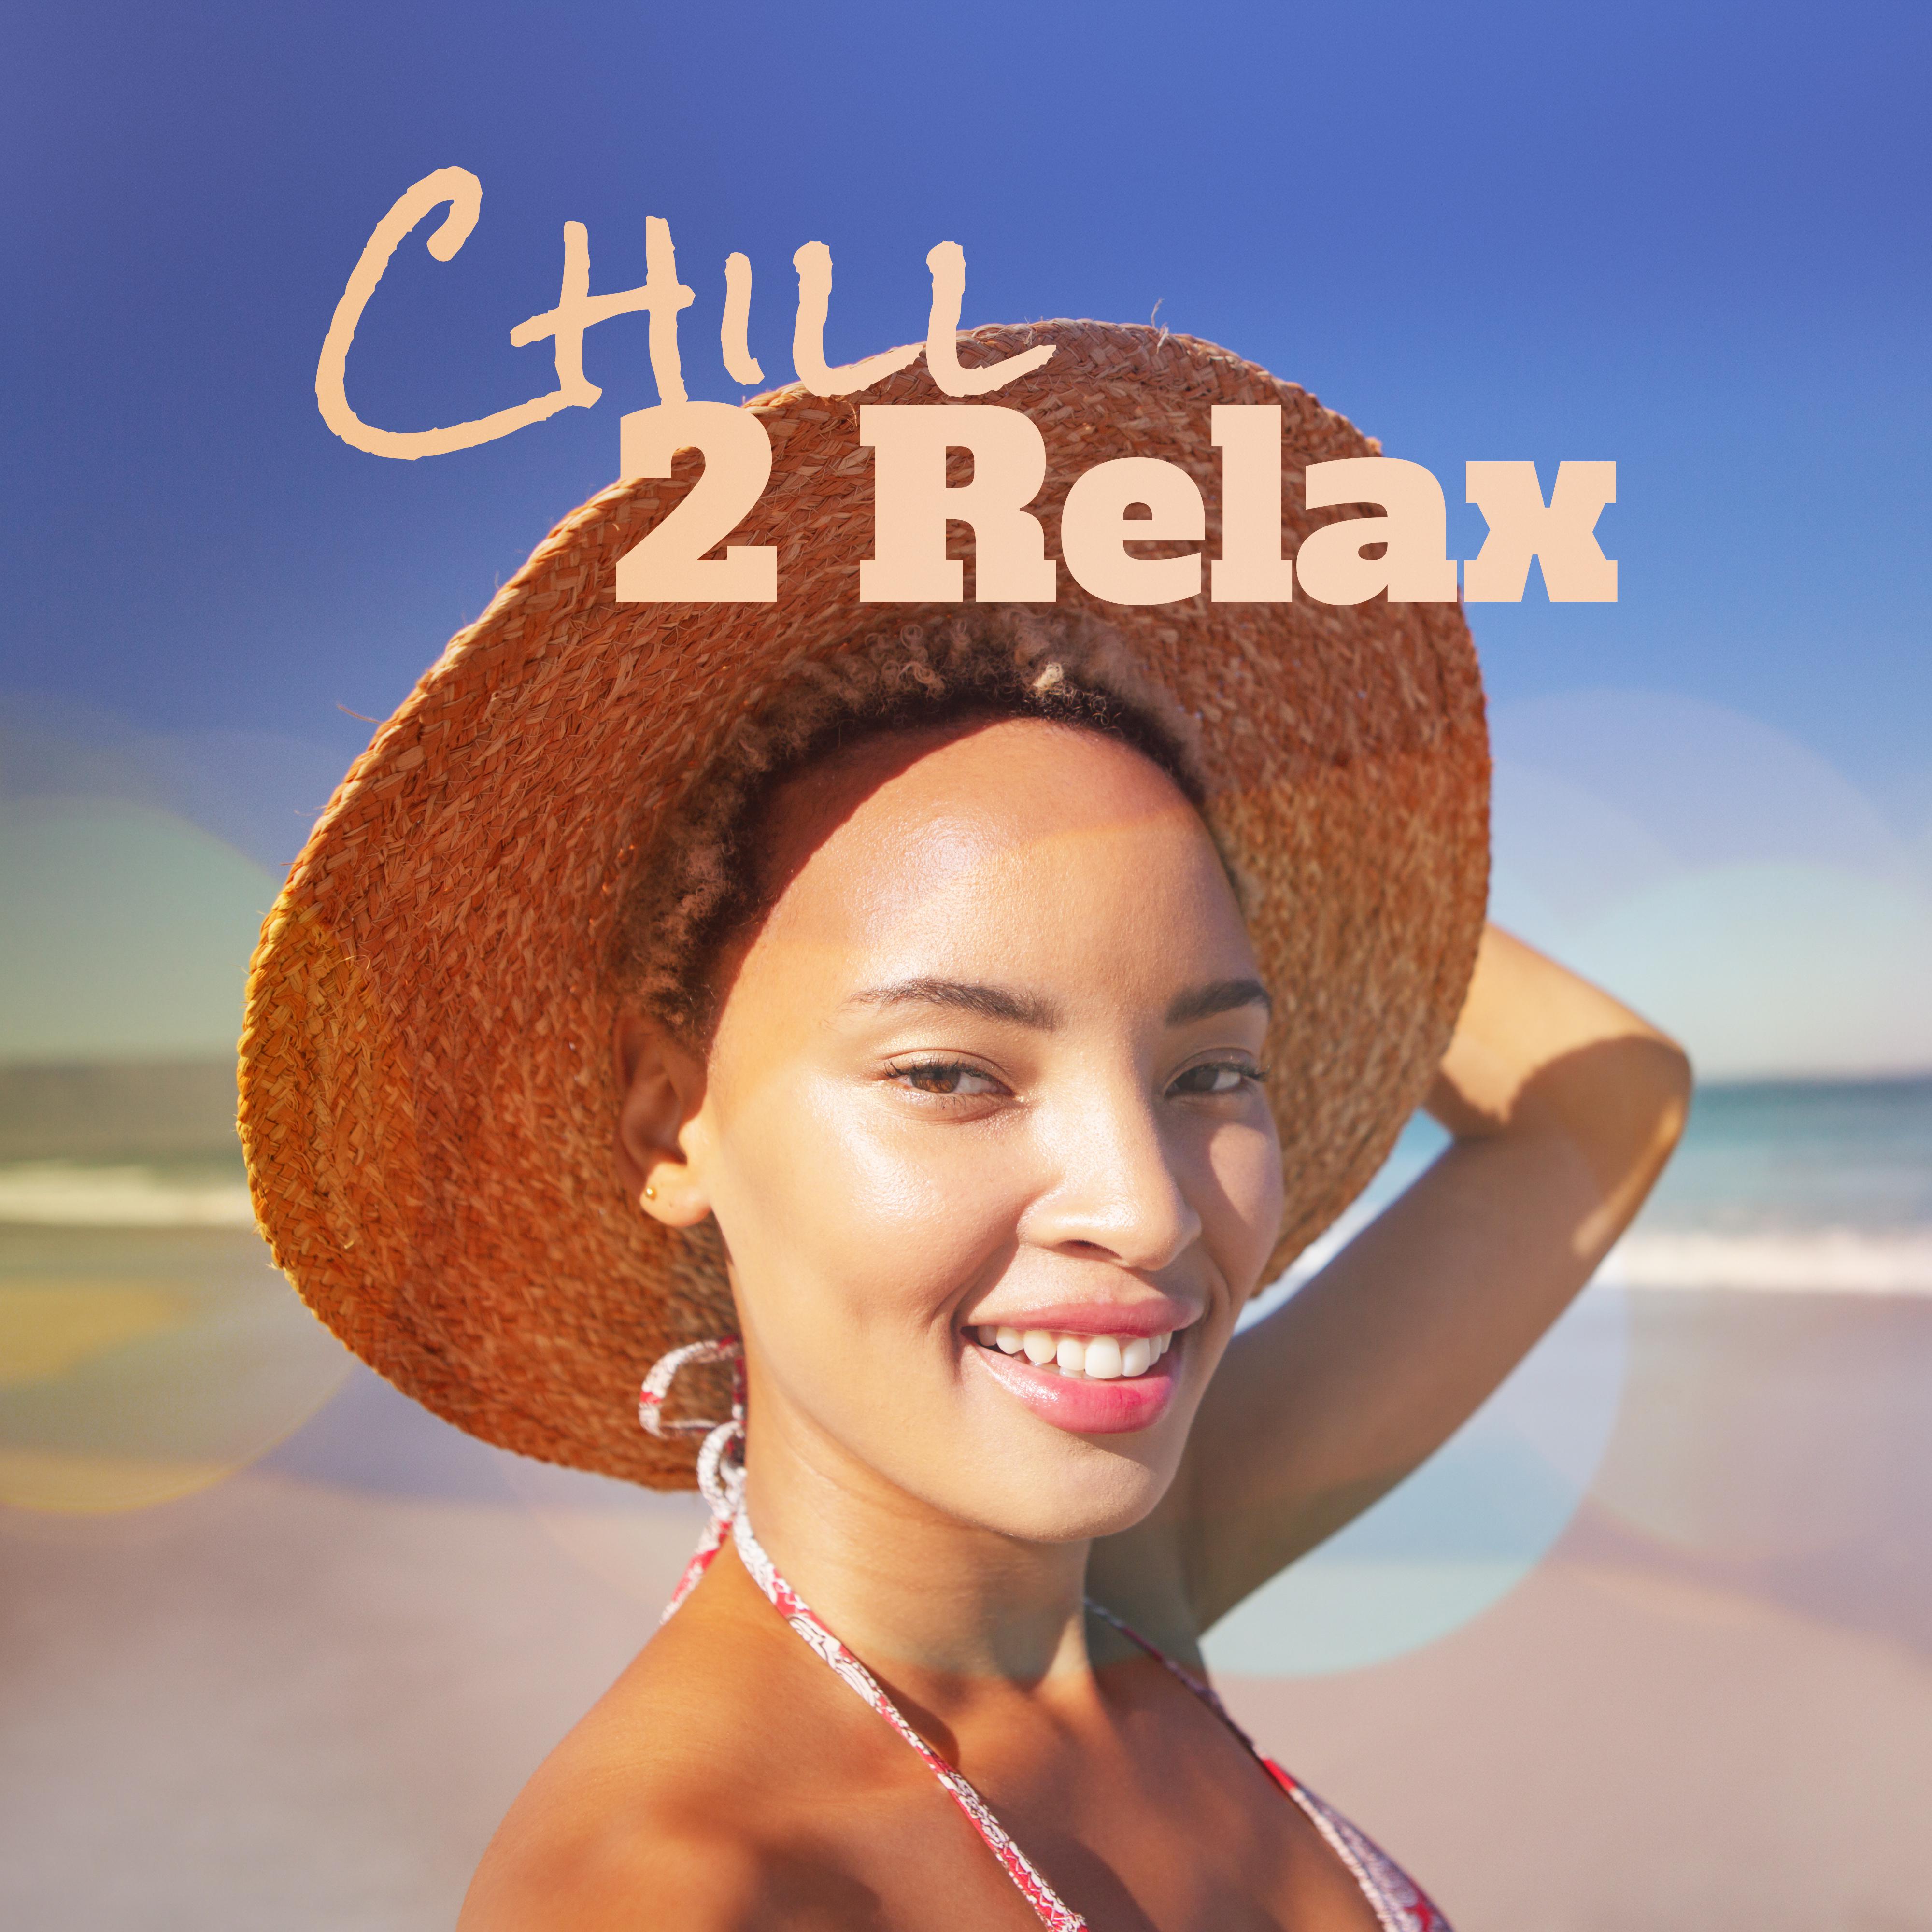 Chill 2 Relax: 2019 Selection of Best Vacation Relaxation Chillout Music, Summer Holiday Celebration Slow Beats & Beautiful Ambient Melodies, Rest & Relax on the Beach